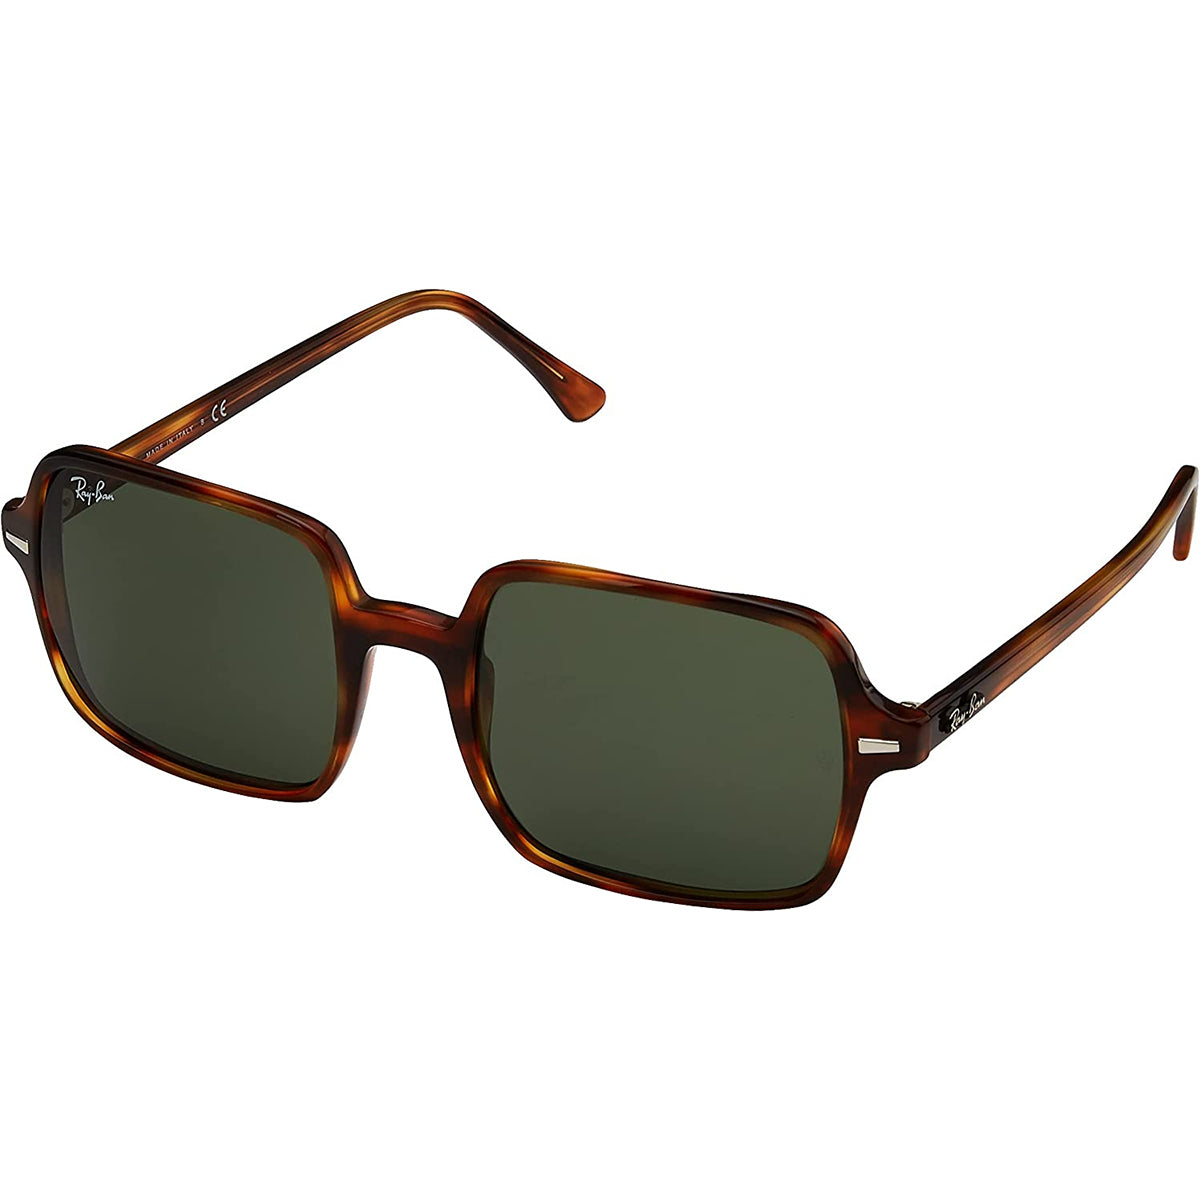 Ray-Ban Square 1973 Women's Lifestyle Sunglasses-0RB1973